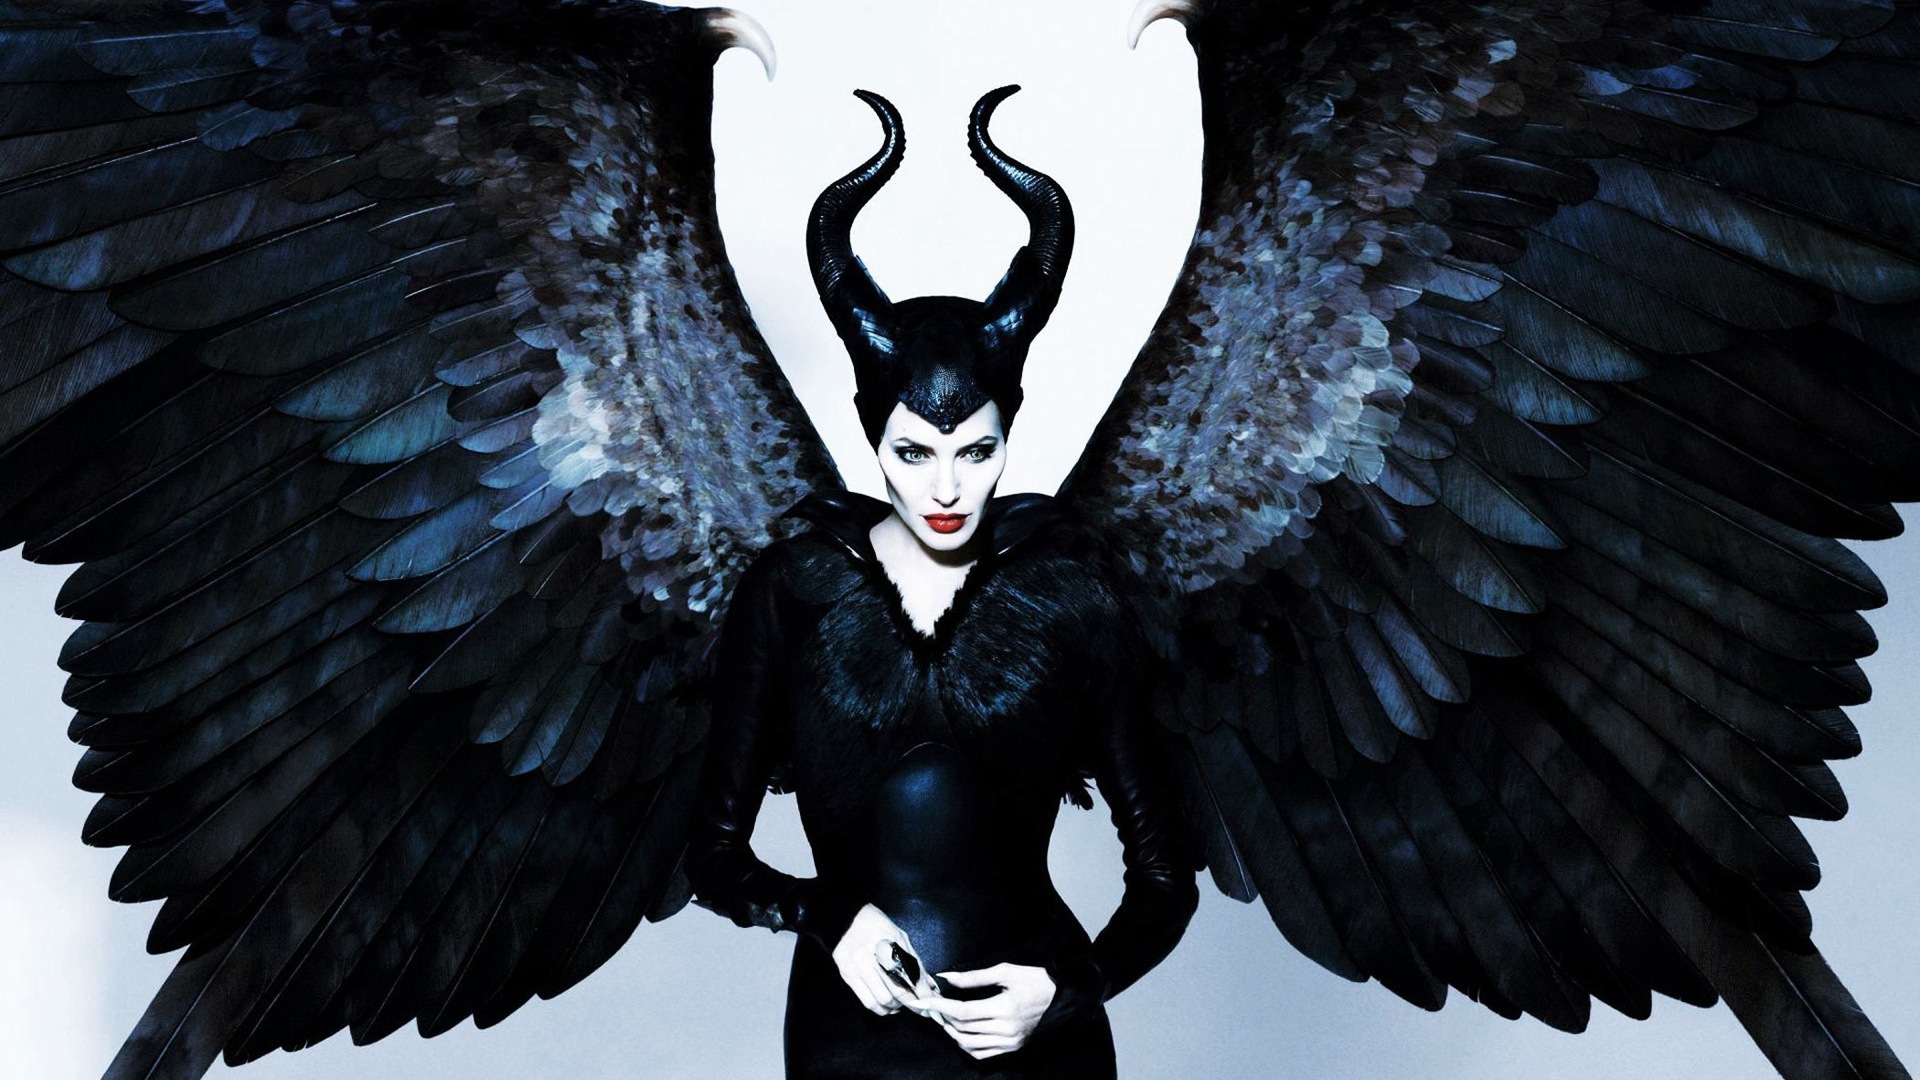 Maleficent 2014 HD movie wallpapers #12 - 1920x1080